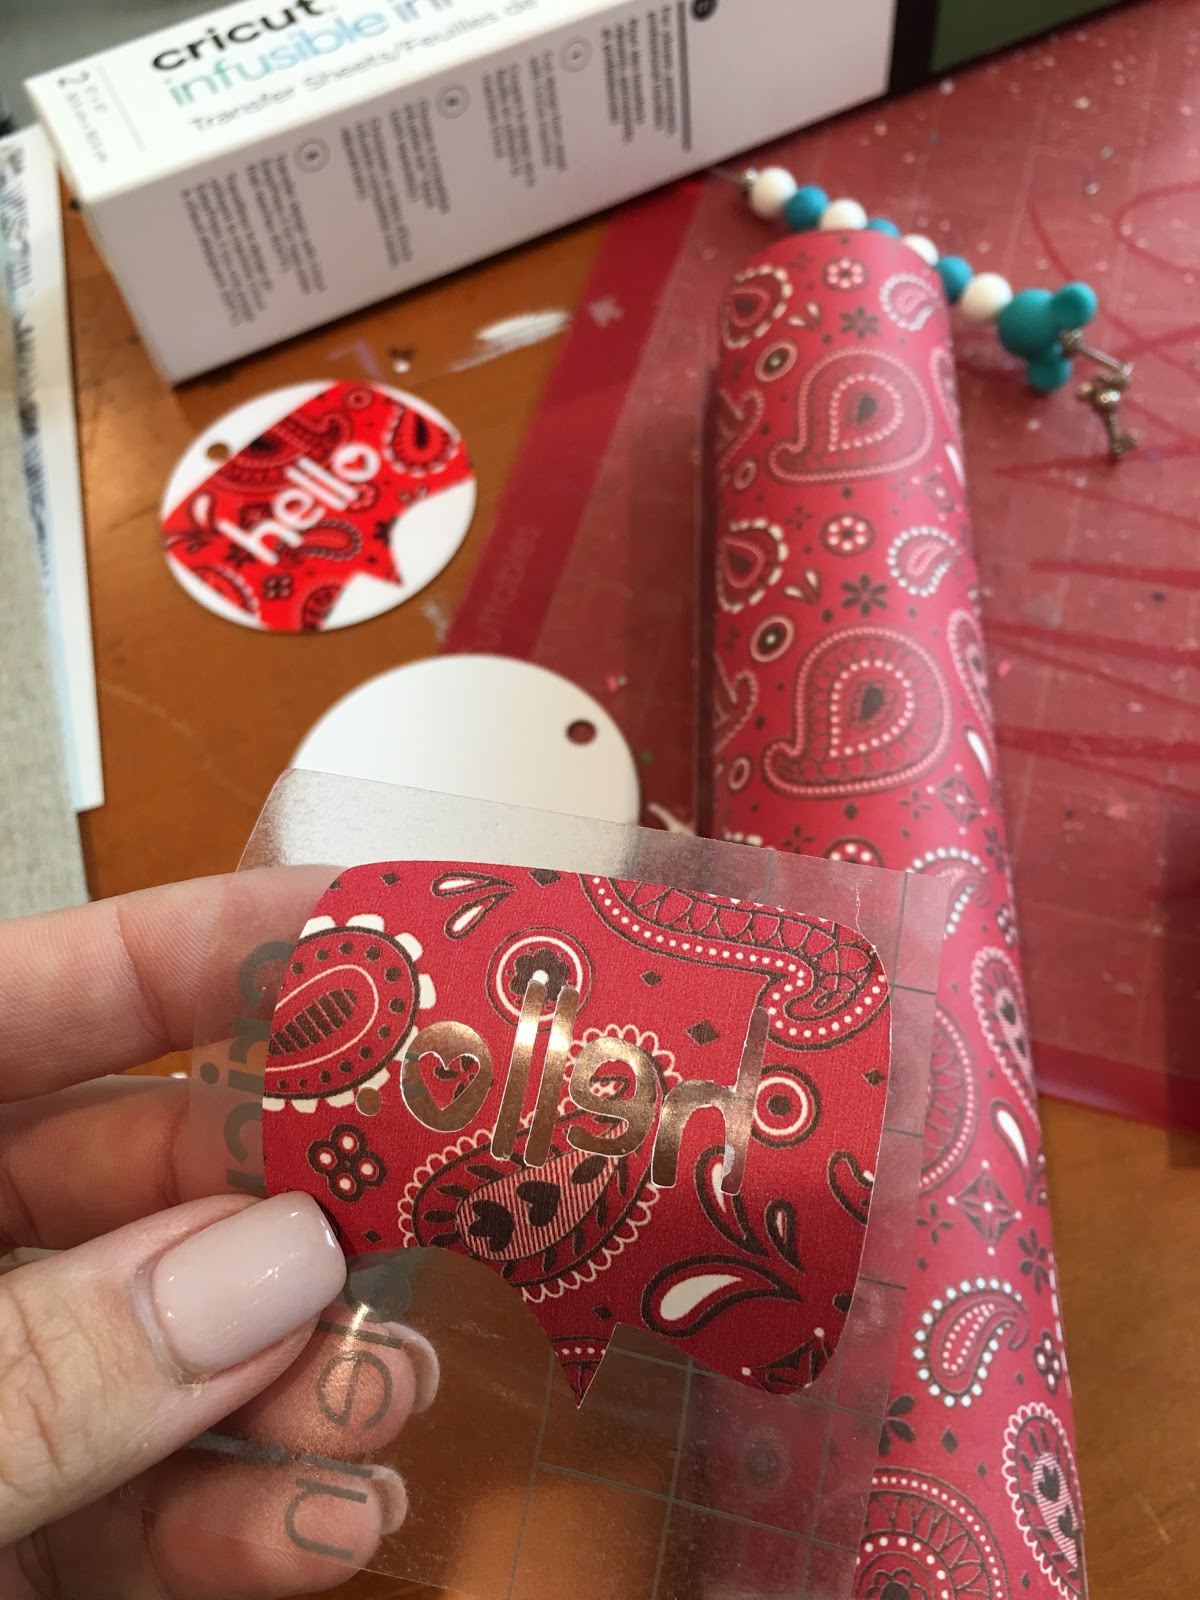 How to Use Cricut Infusible Ink Sheets and Markers - Red Cottage Chronicles